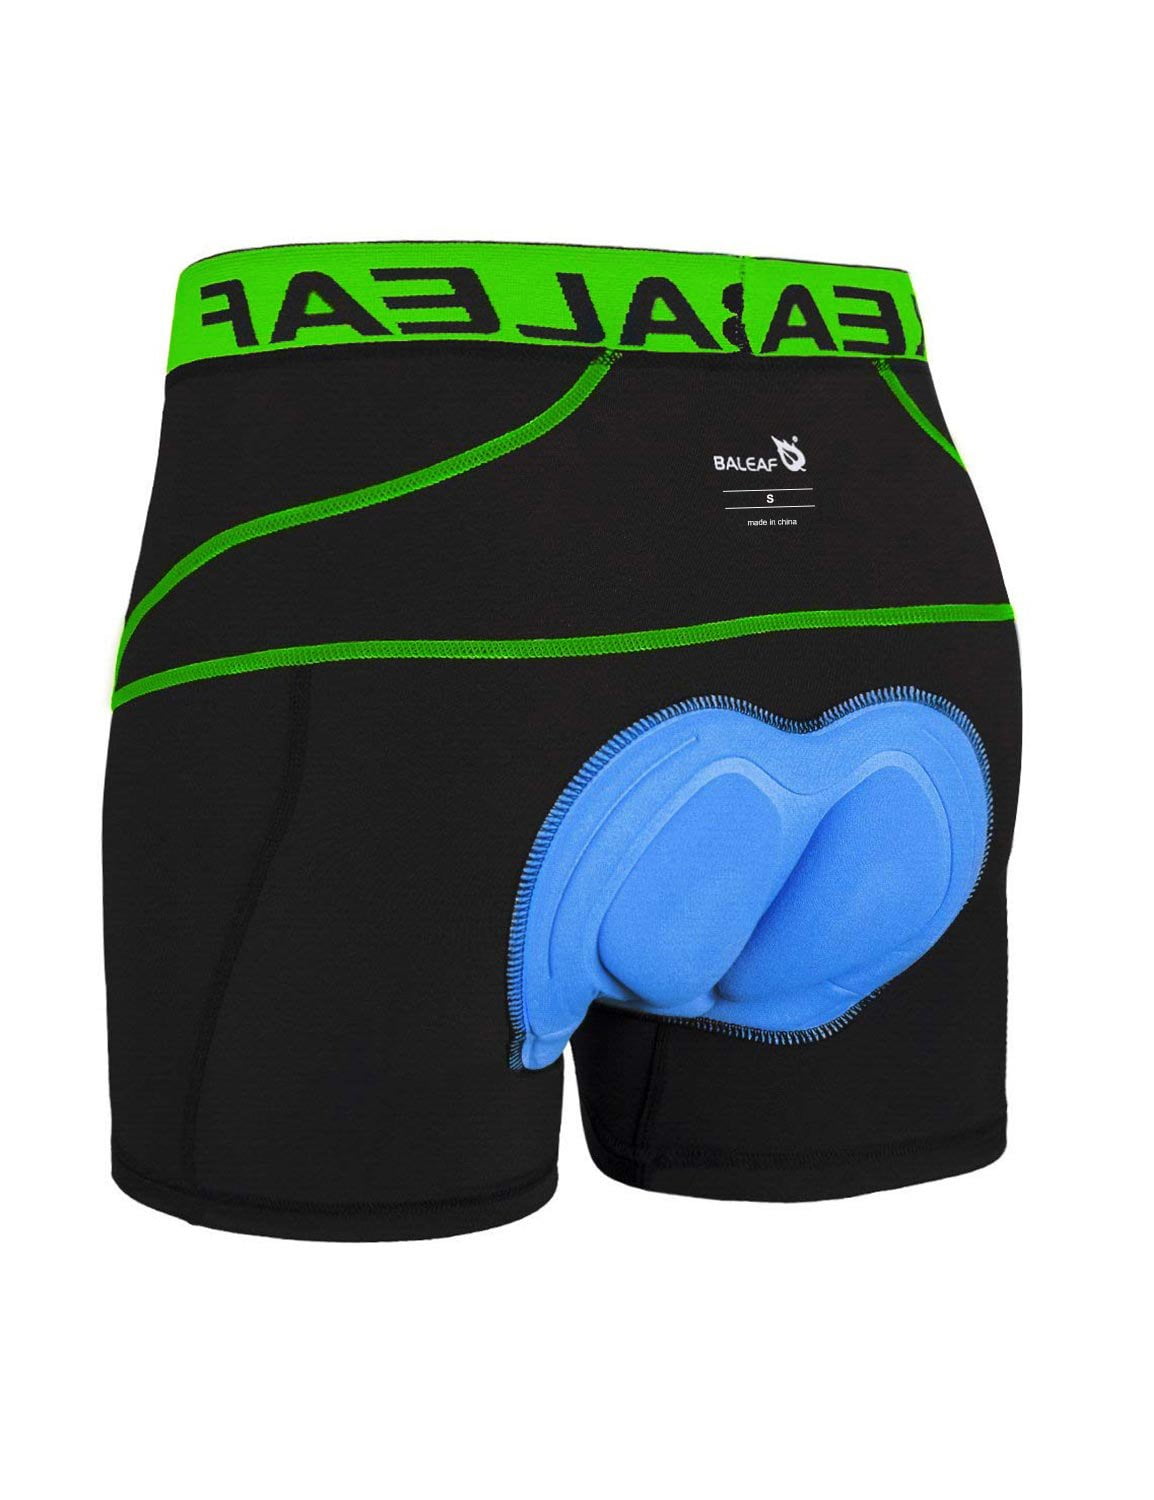 Men's 3D Gel Padded Bicycle Cycling Shorts Bike Riding Underwear Soft Gift UK 